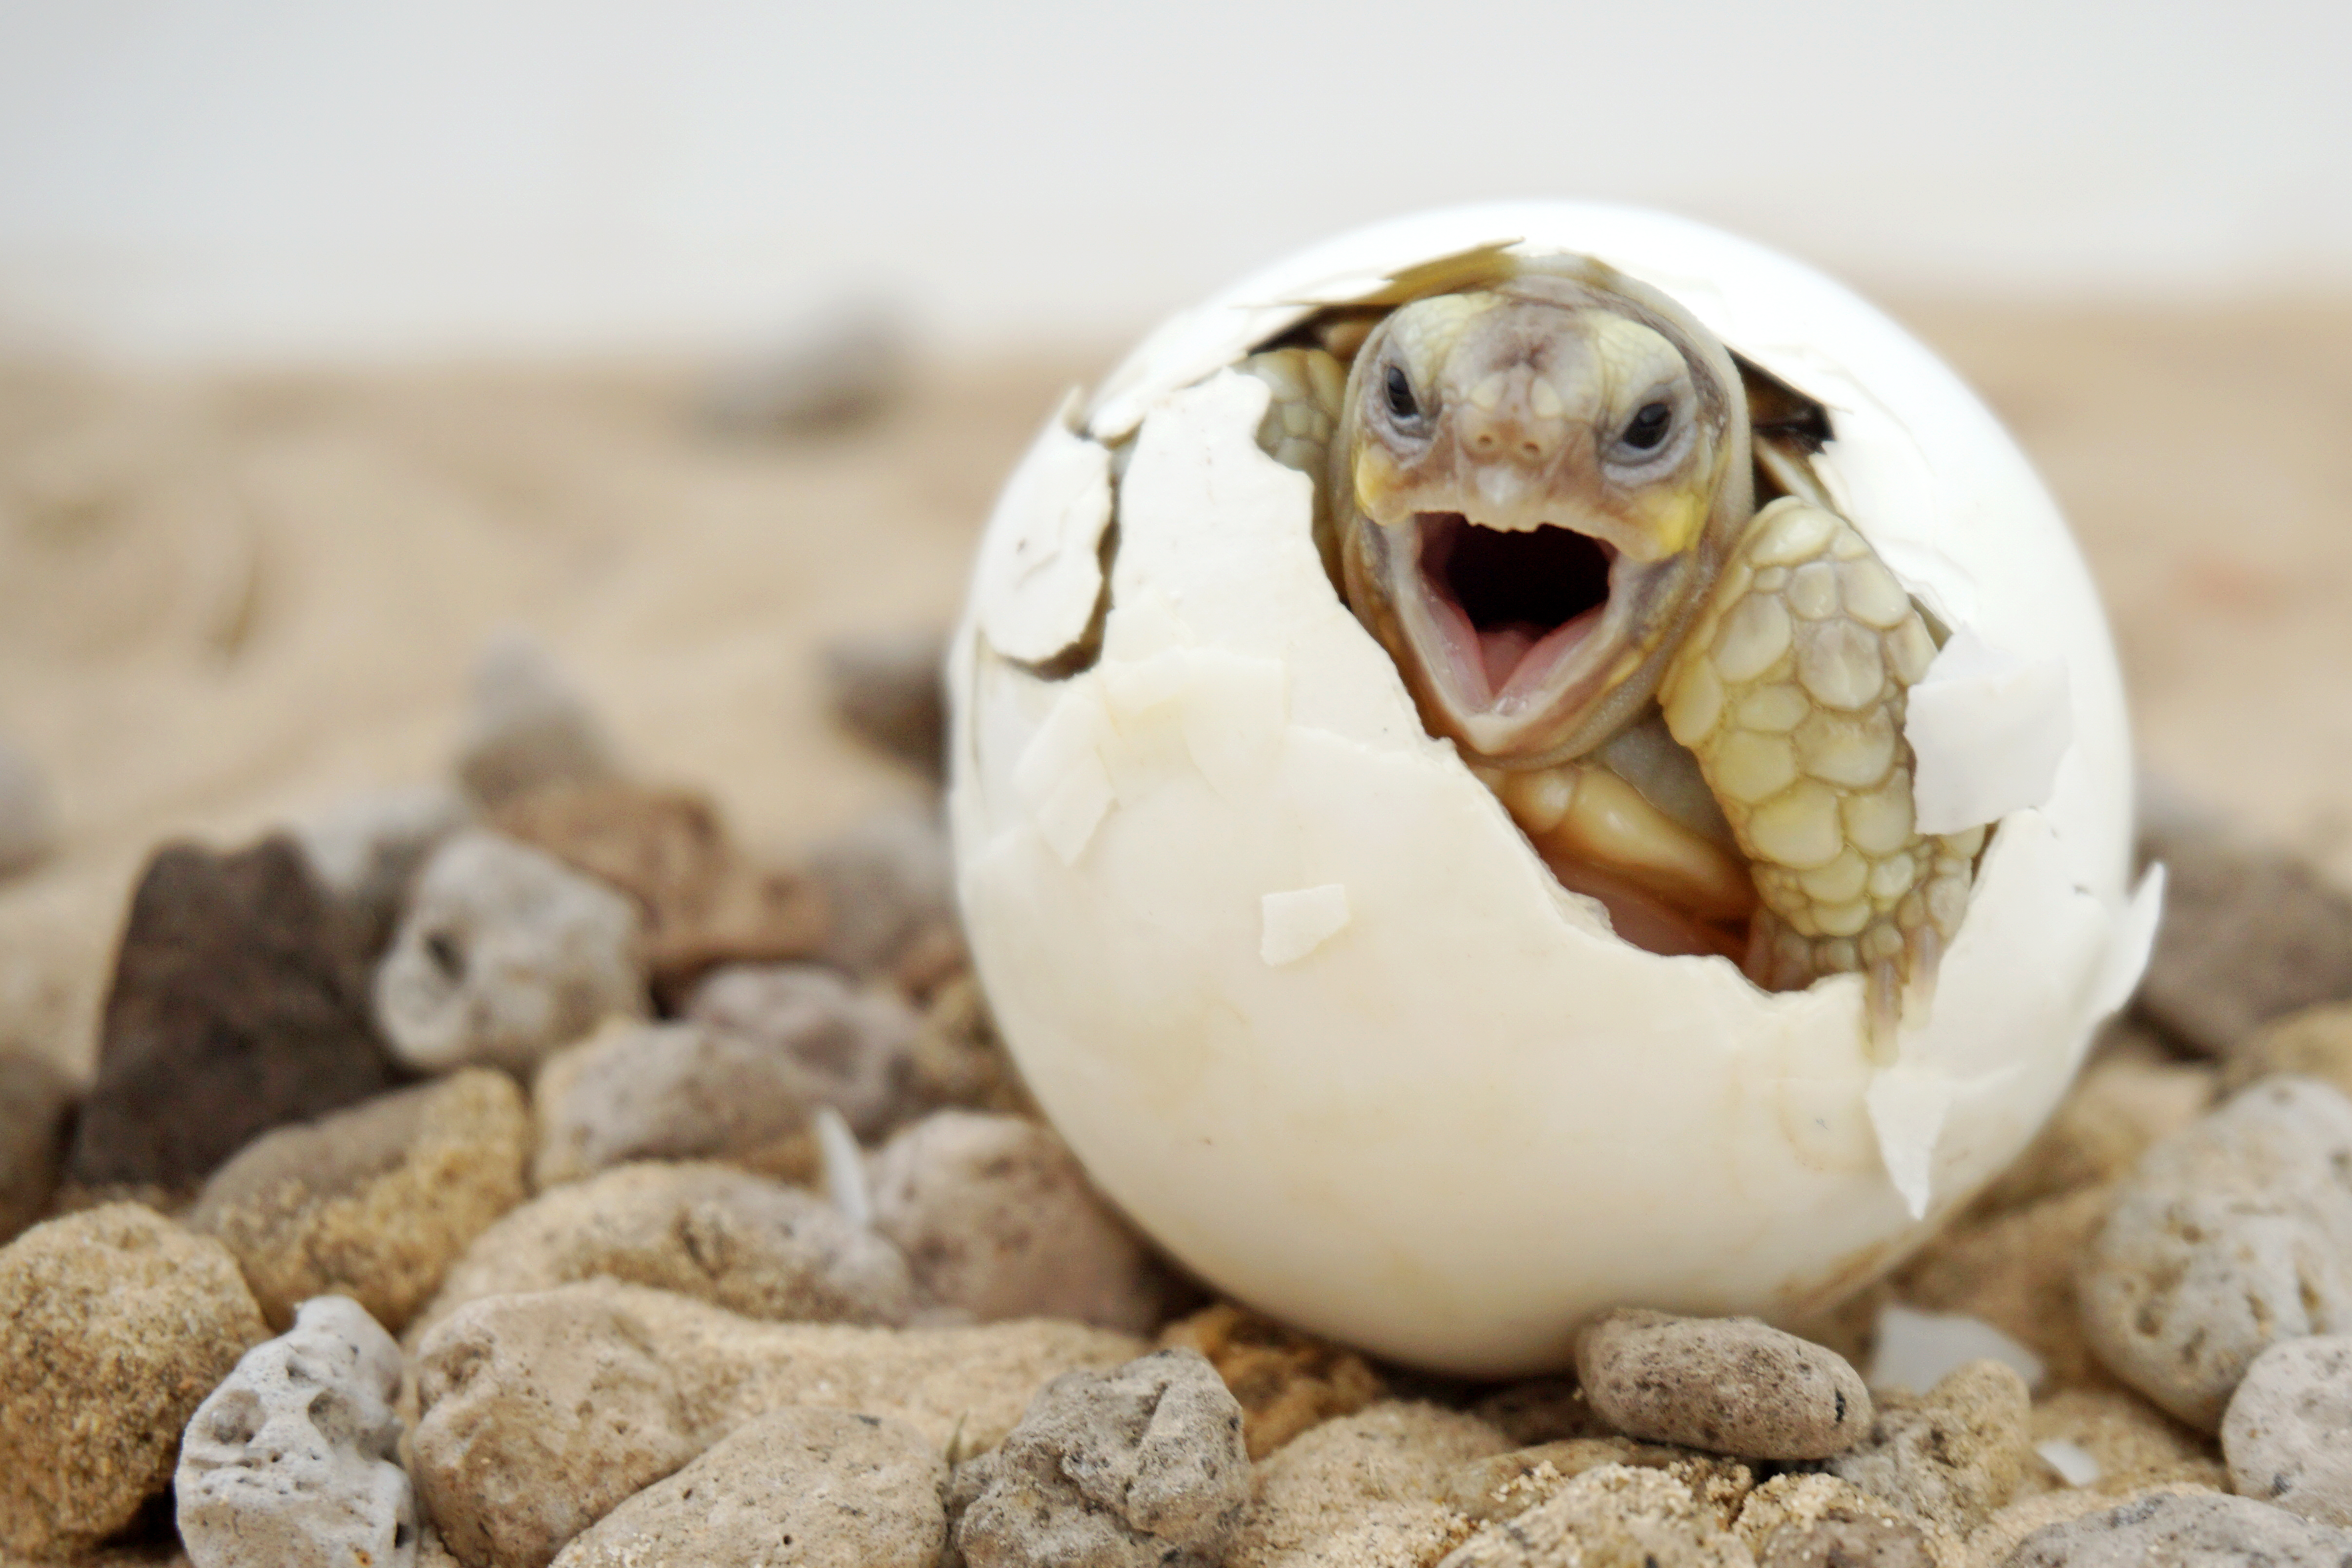 Turtle Hatching from it shell